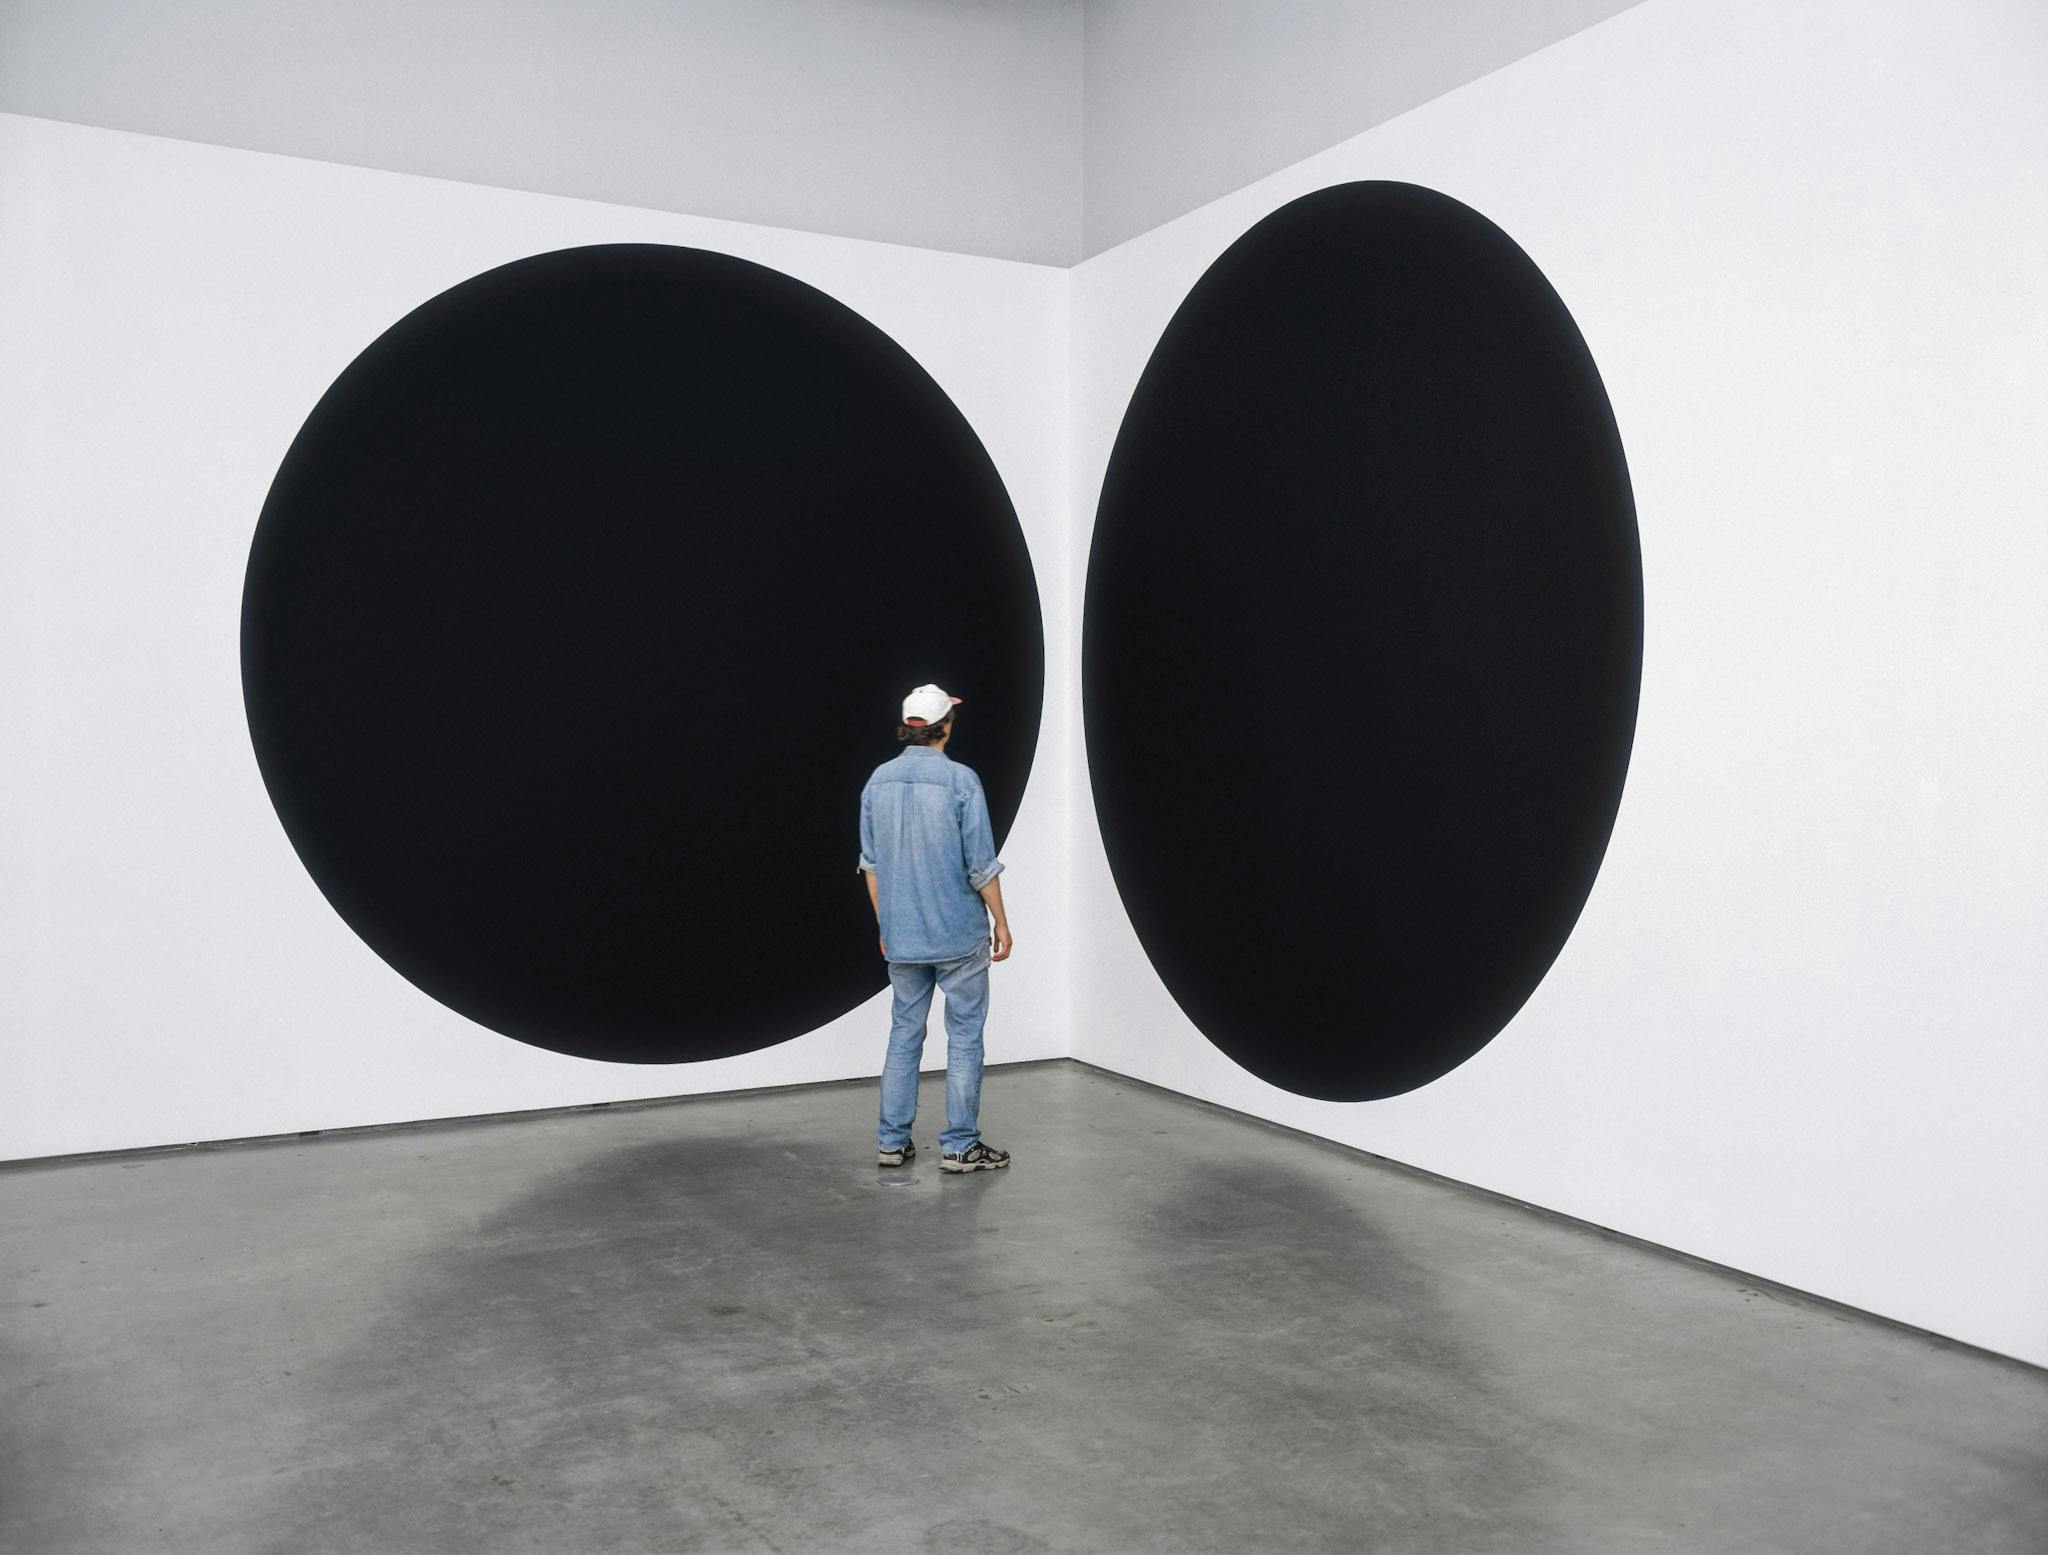 Installation image of paintings by Neil Campbell. The work is a pair of black circles. They are installed on the walls near the corner. The paintings are as tall as the gallery wall, and twice as tall as a person standing in front of them. 